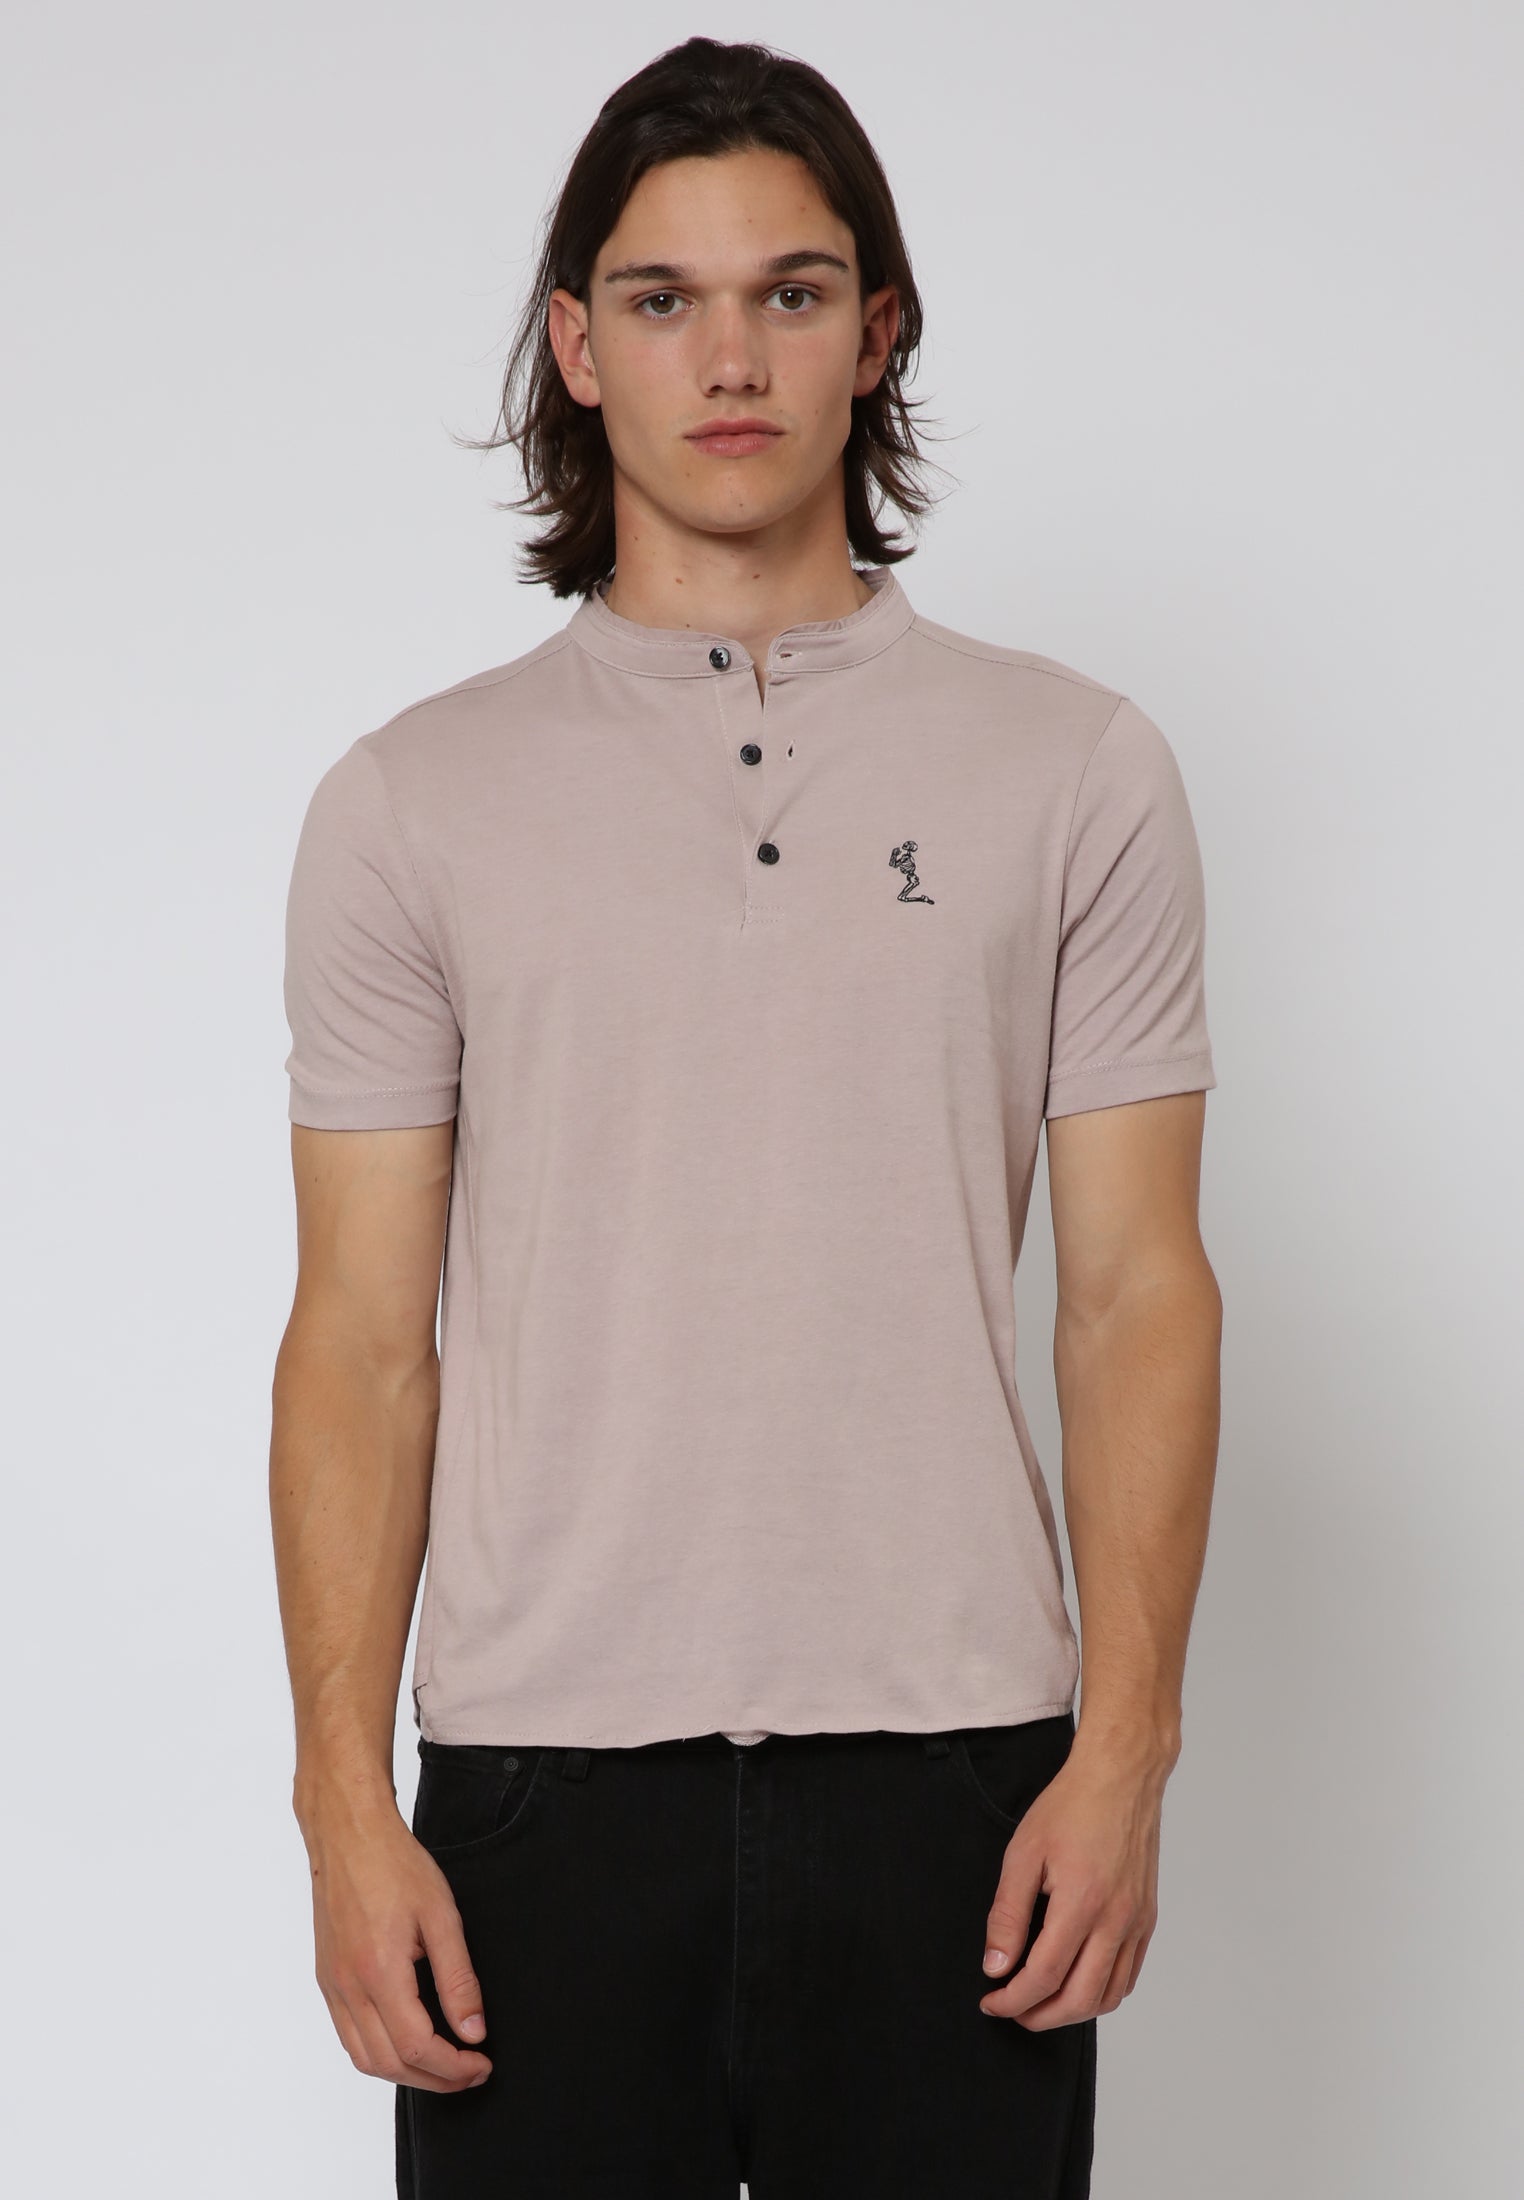 ESSENTIAL ORSON ASHES OF ROSES POLO SHIRT